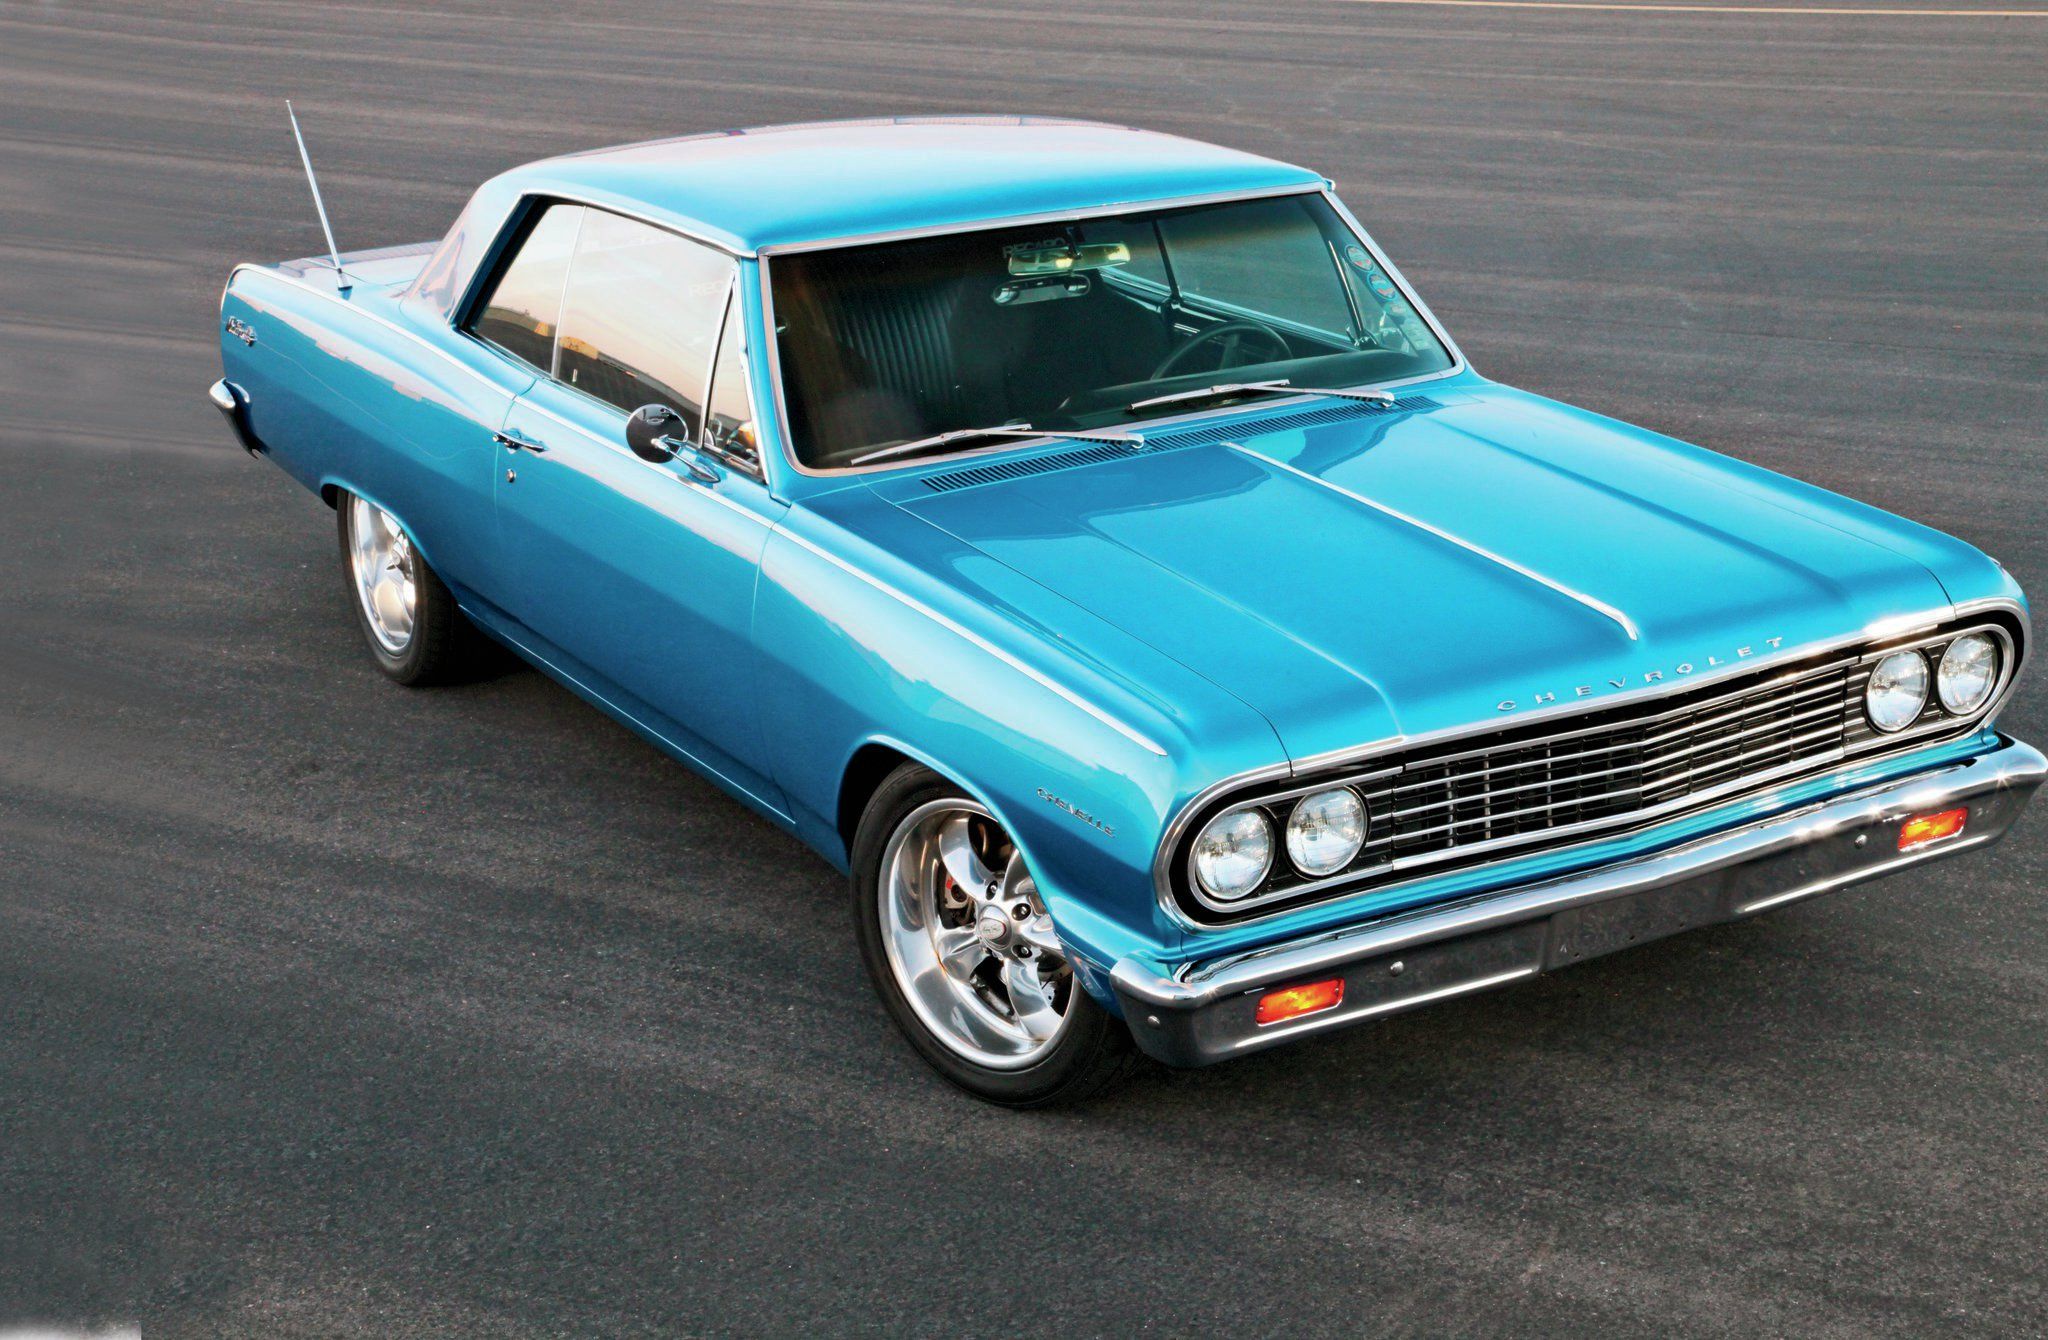 The 1964 Chevelle was the first of three generations of its model.